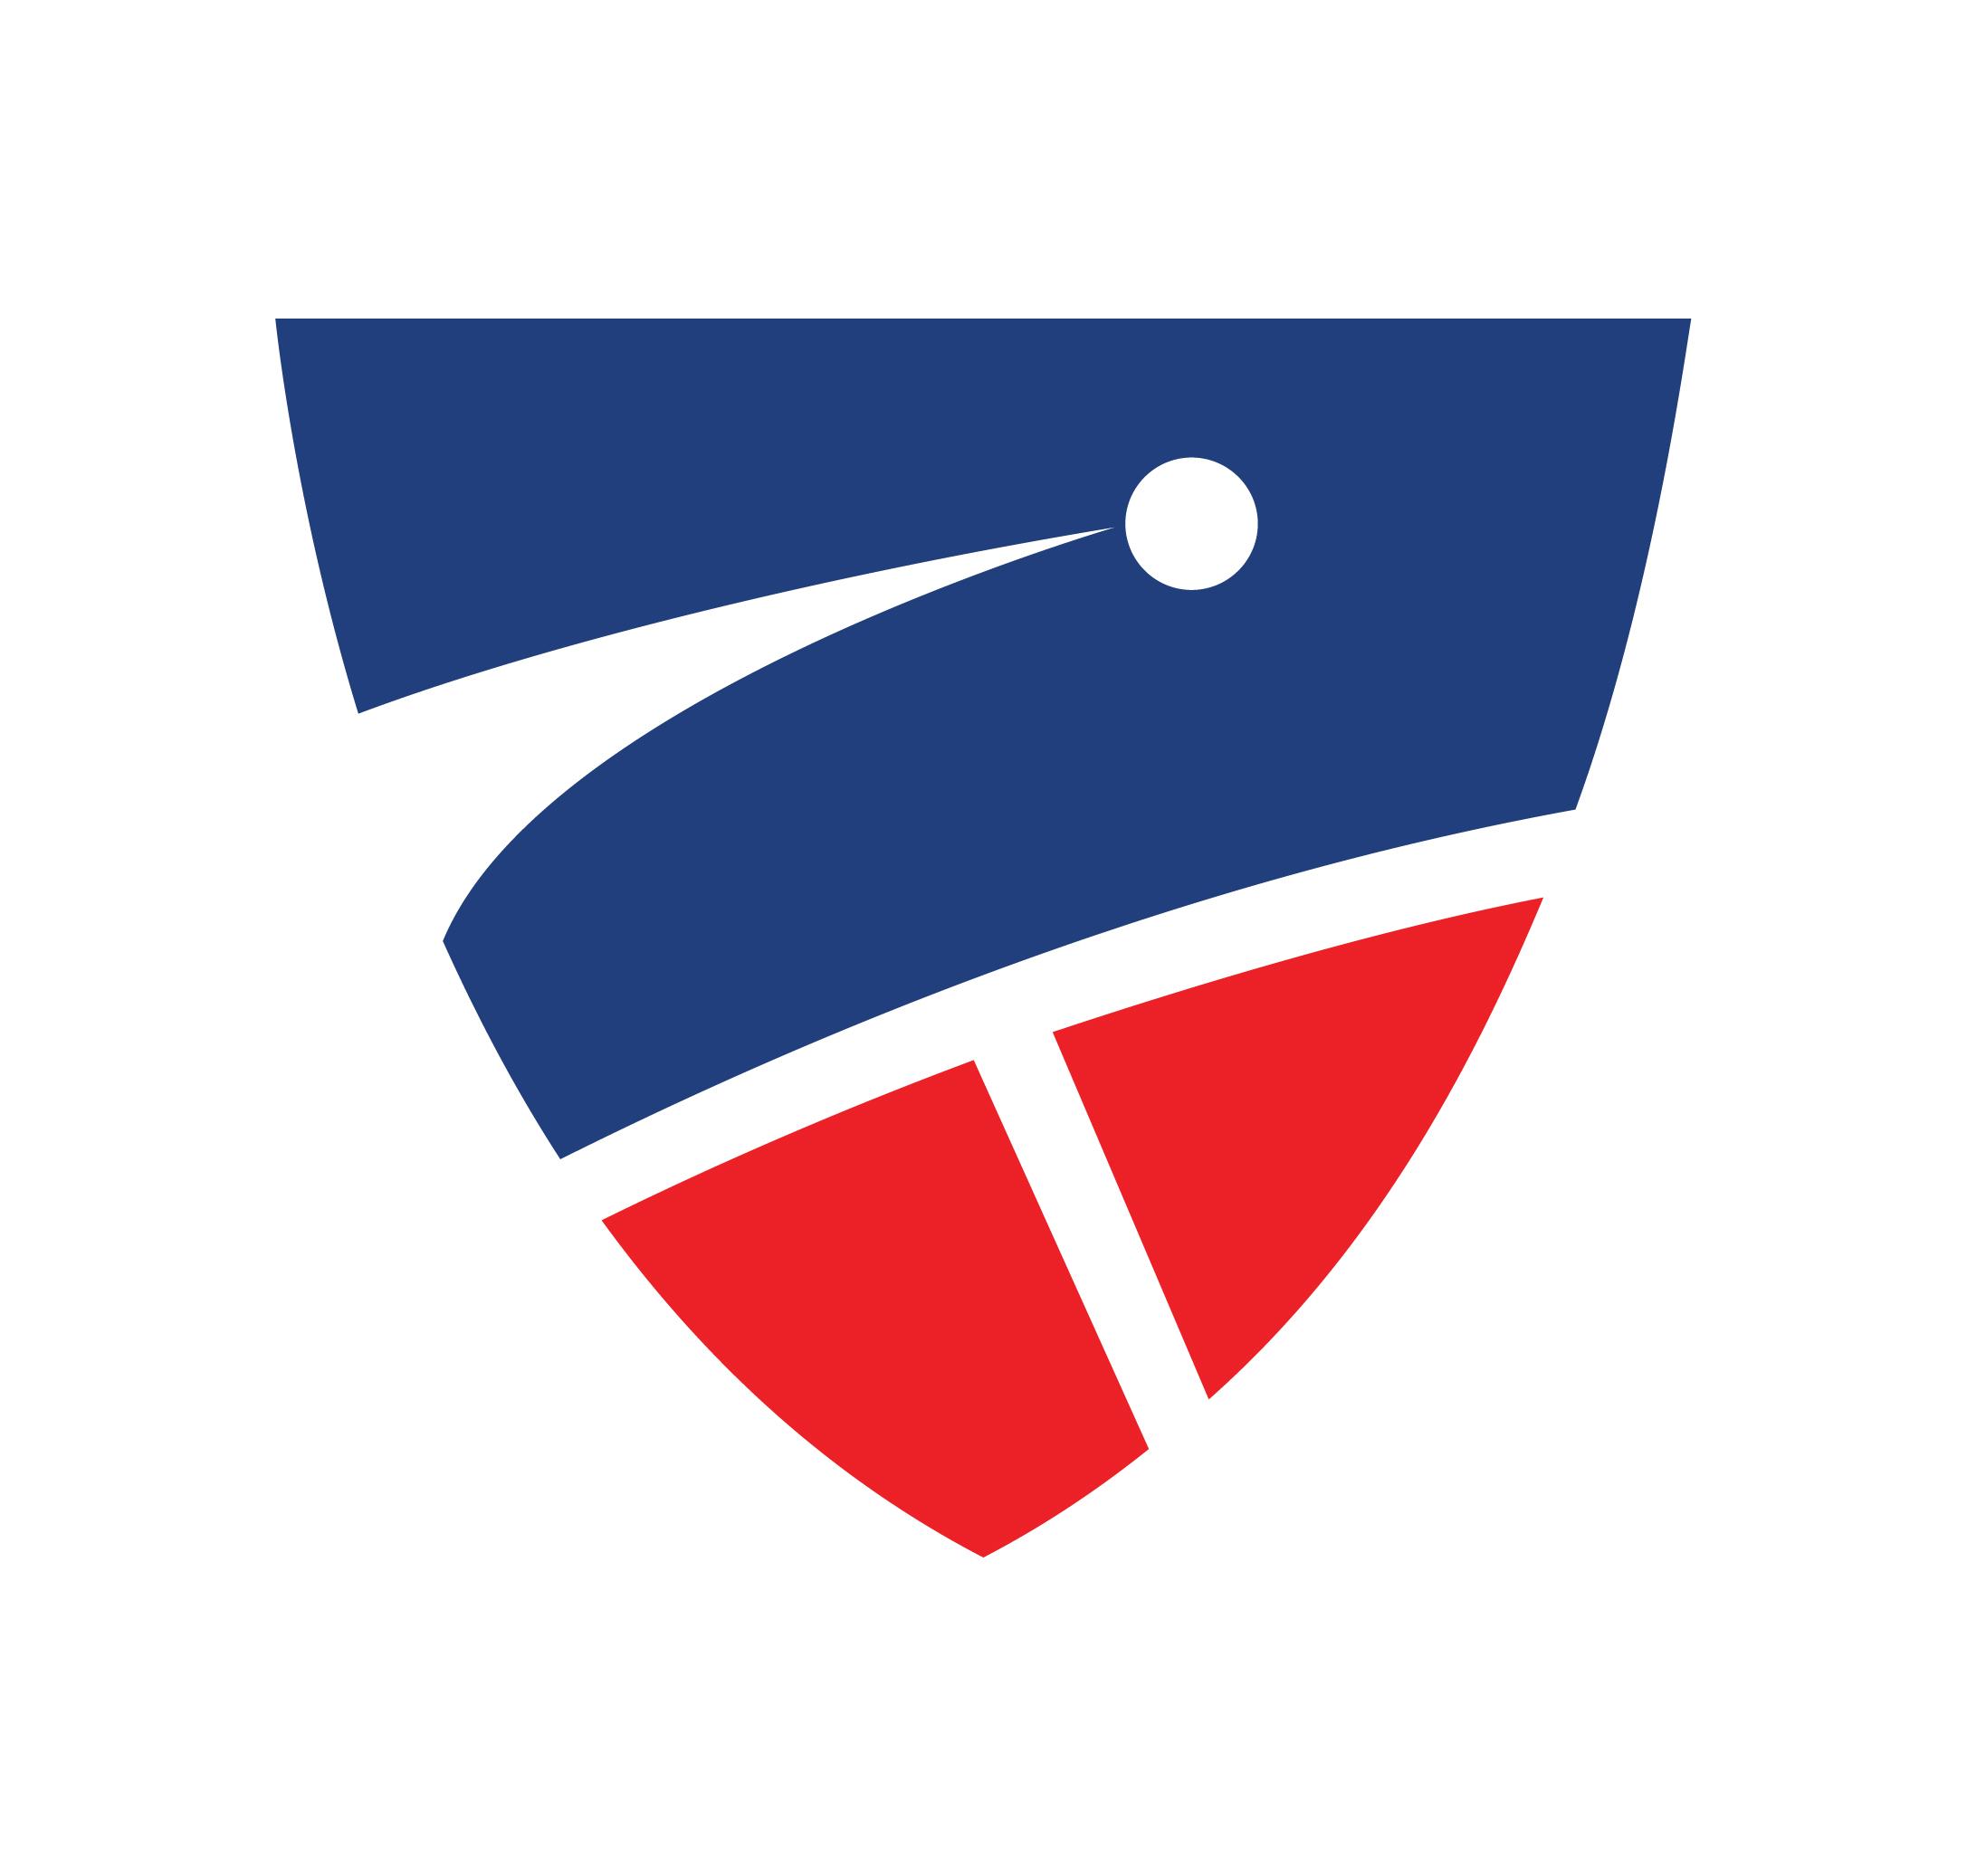 Red and Blue Logo - US SQUASH